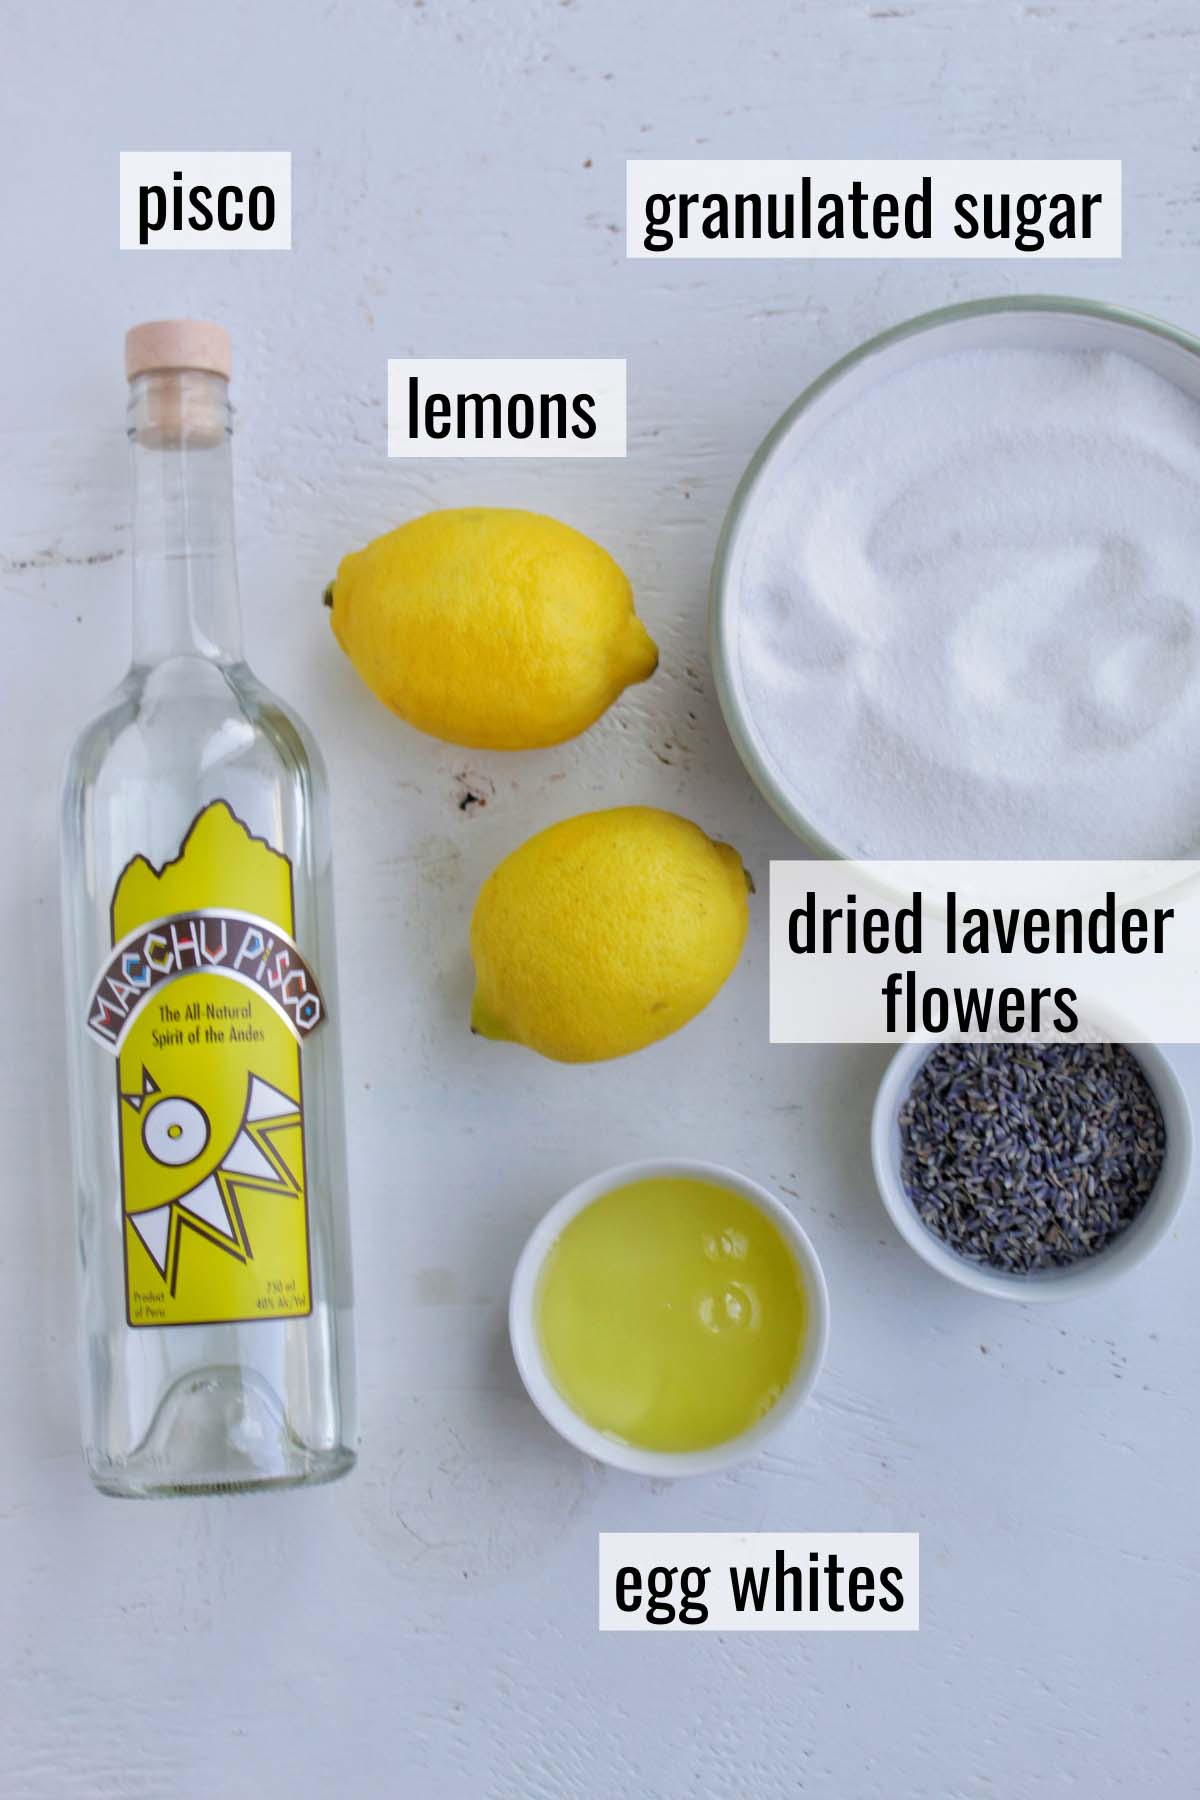 lemon pisco sour ingredients with labels.